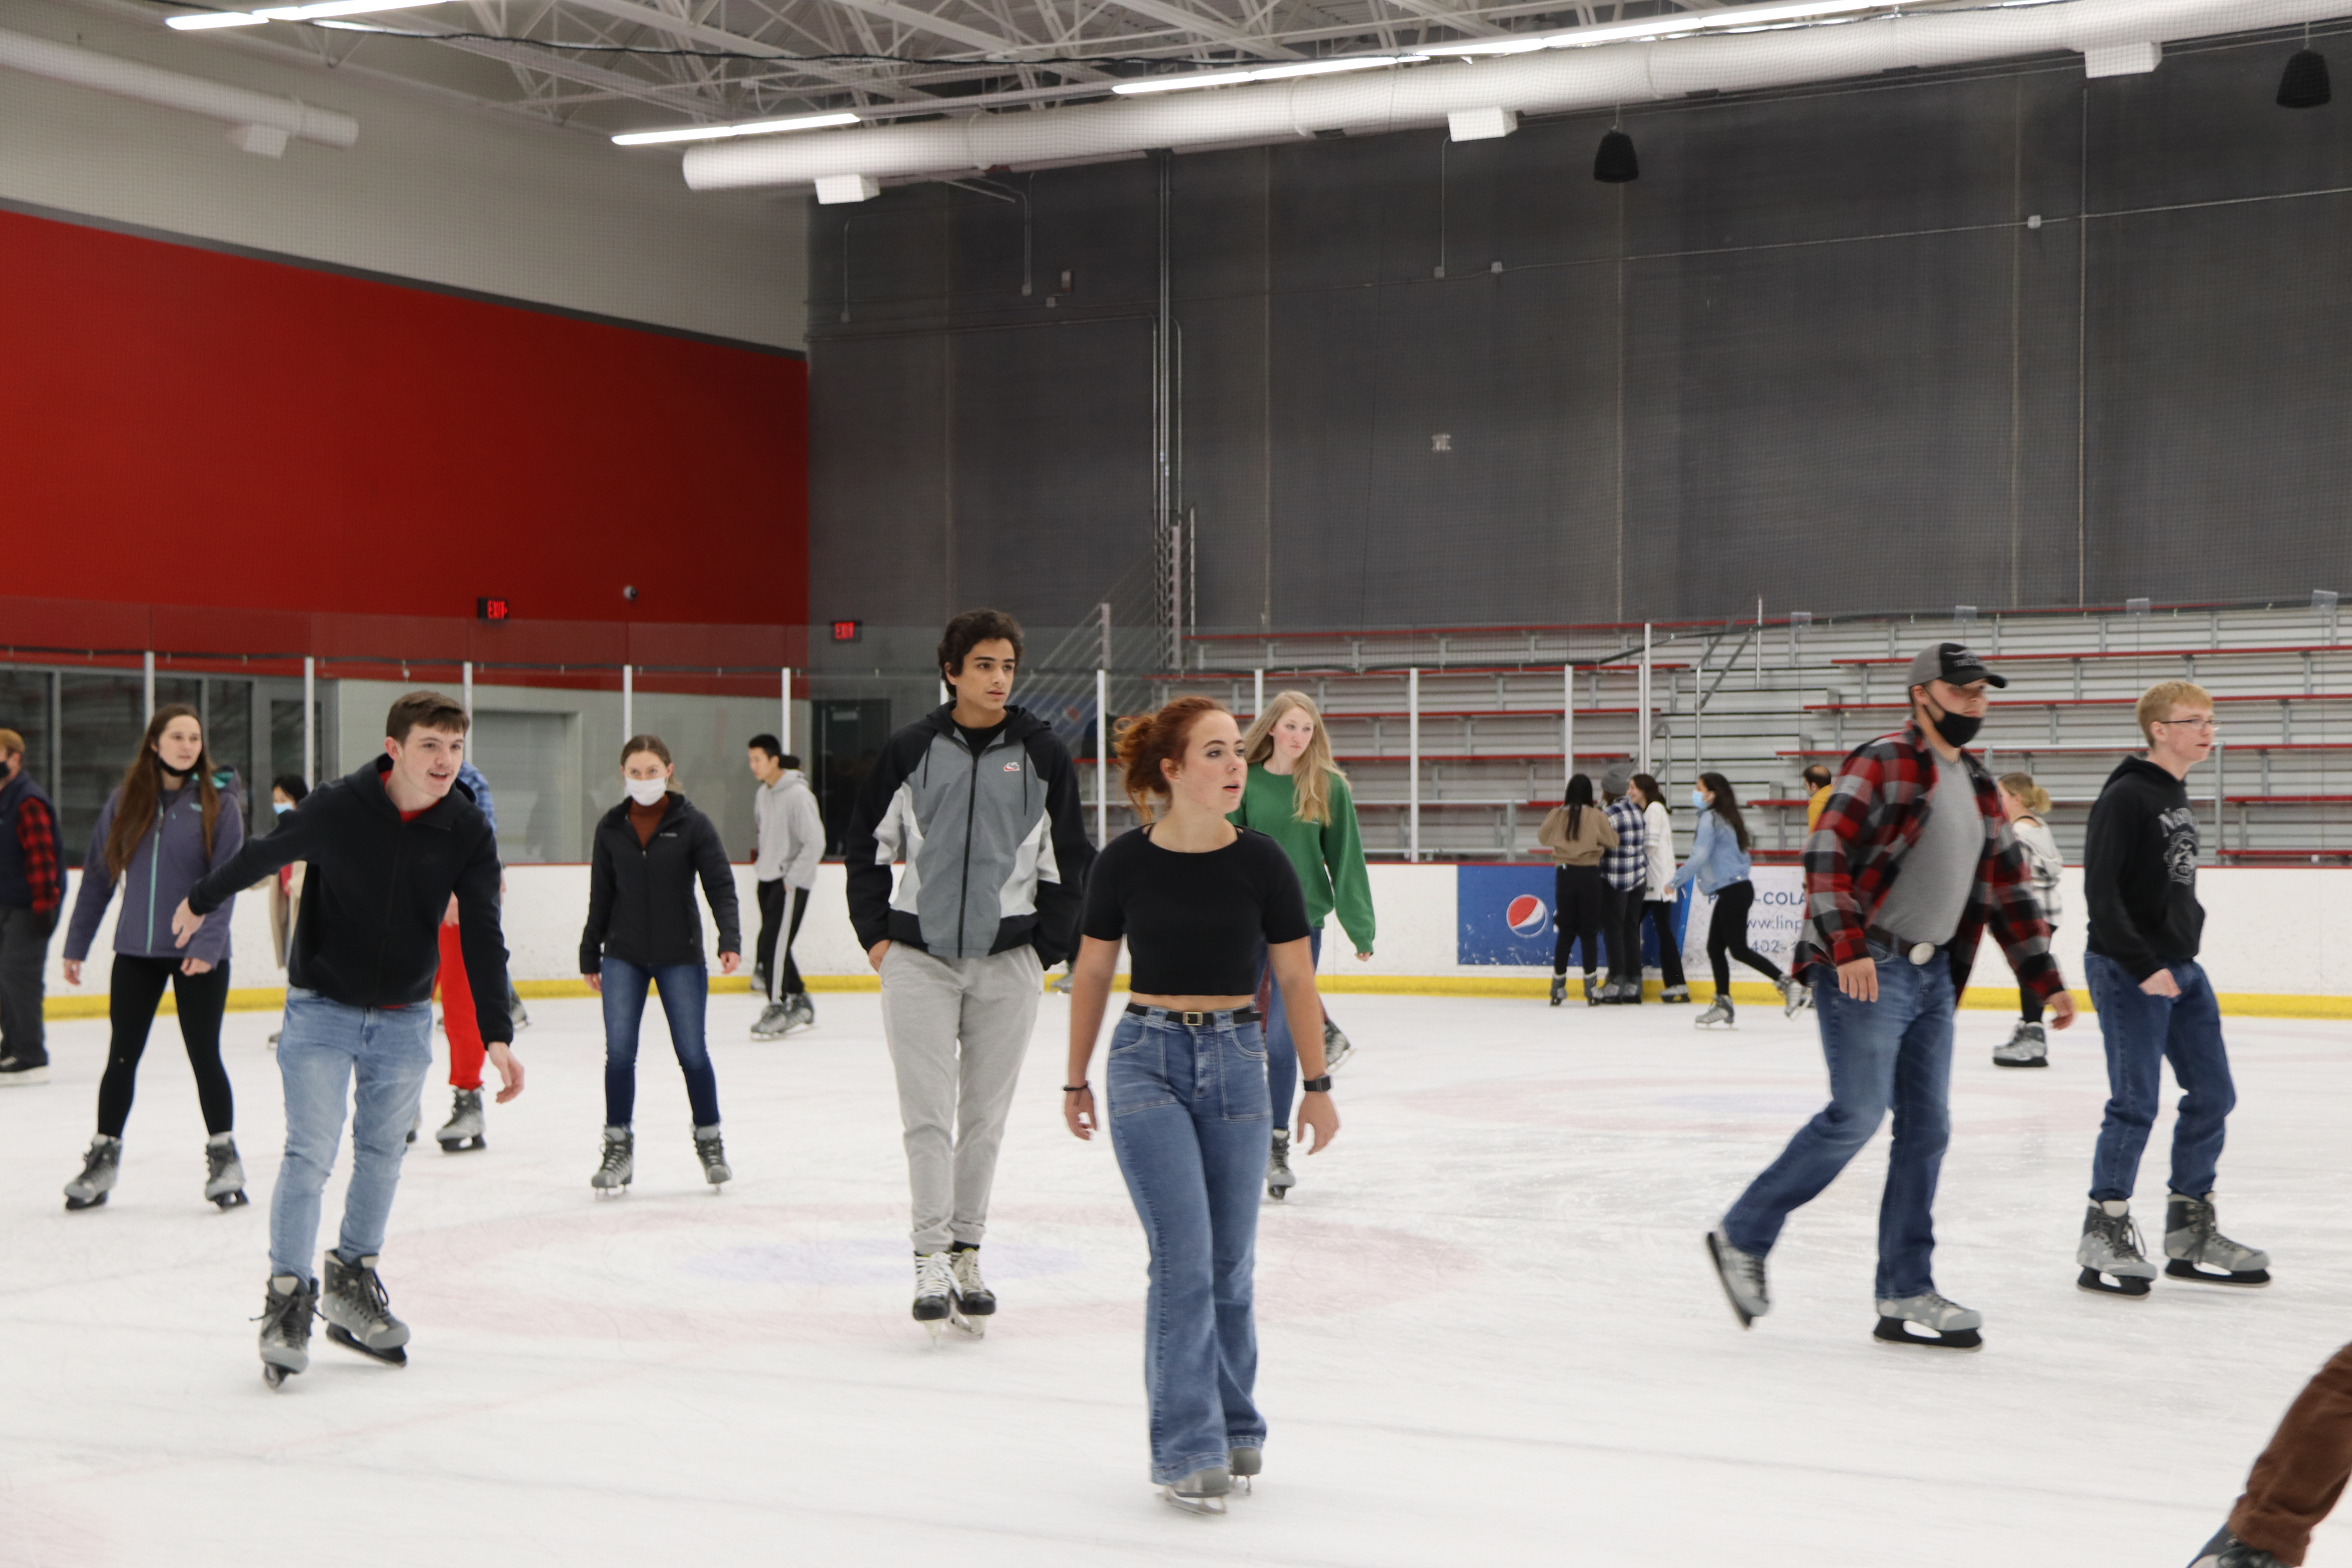 Free Skate Night for UNL students is March 25, 2022, at the Breslow Ice Hockey Center.